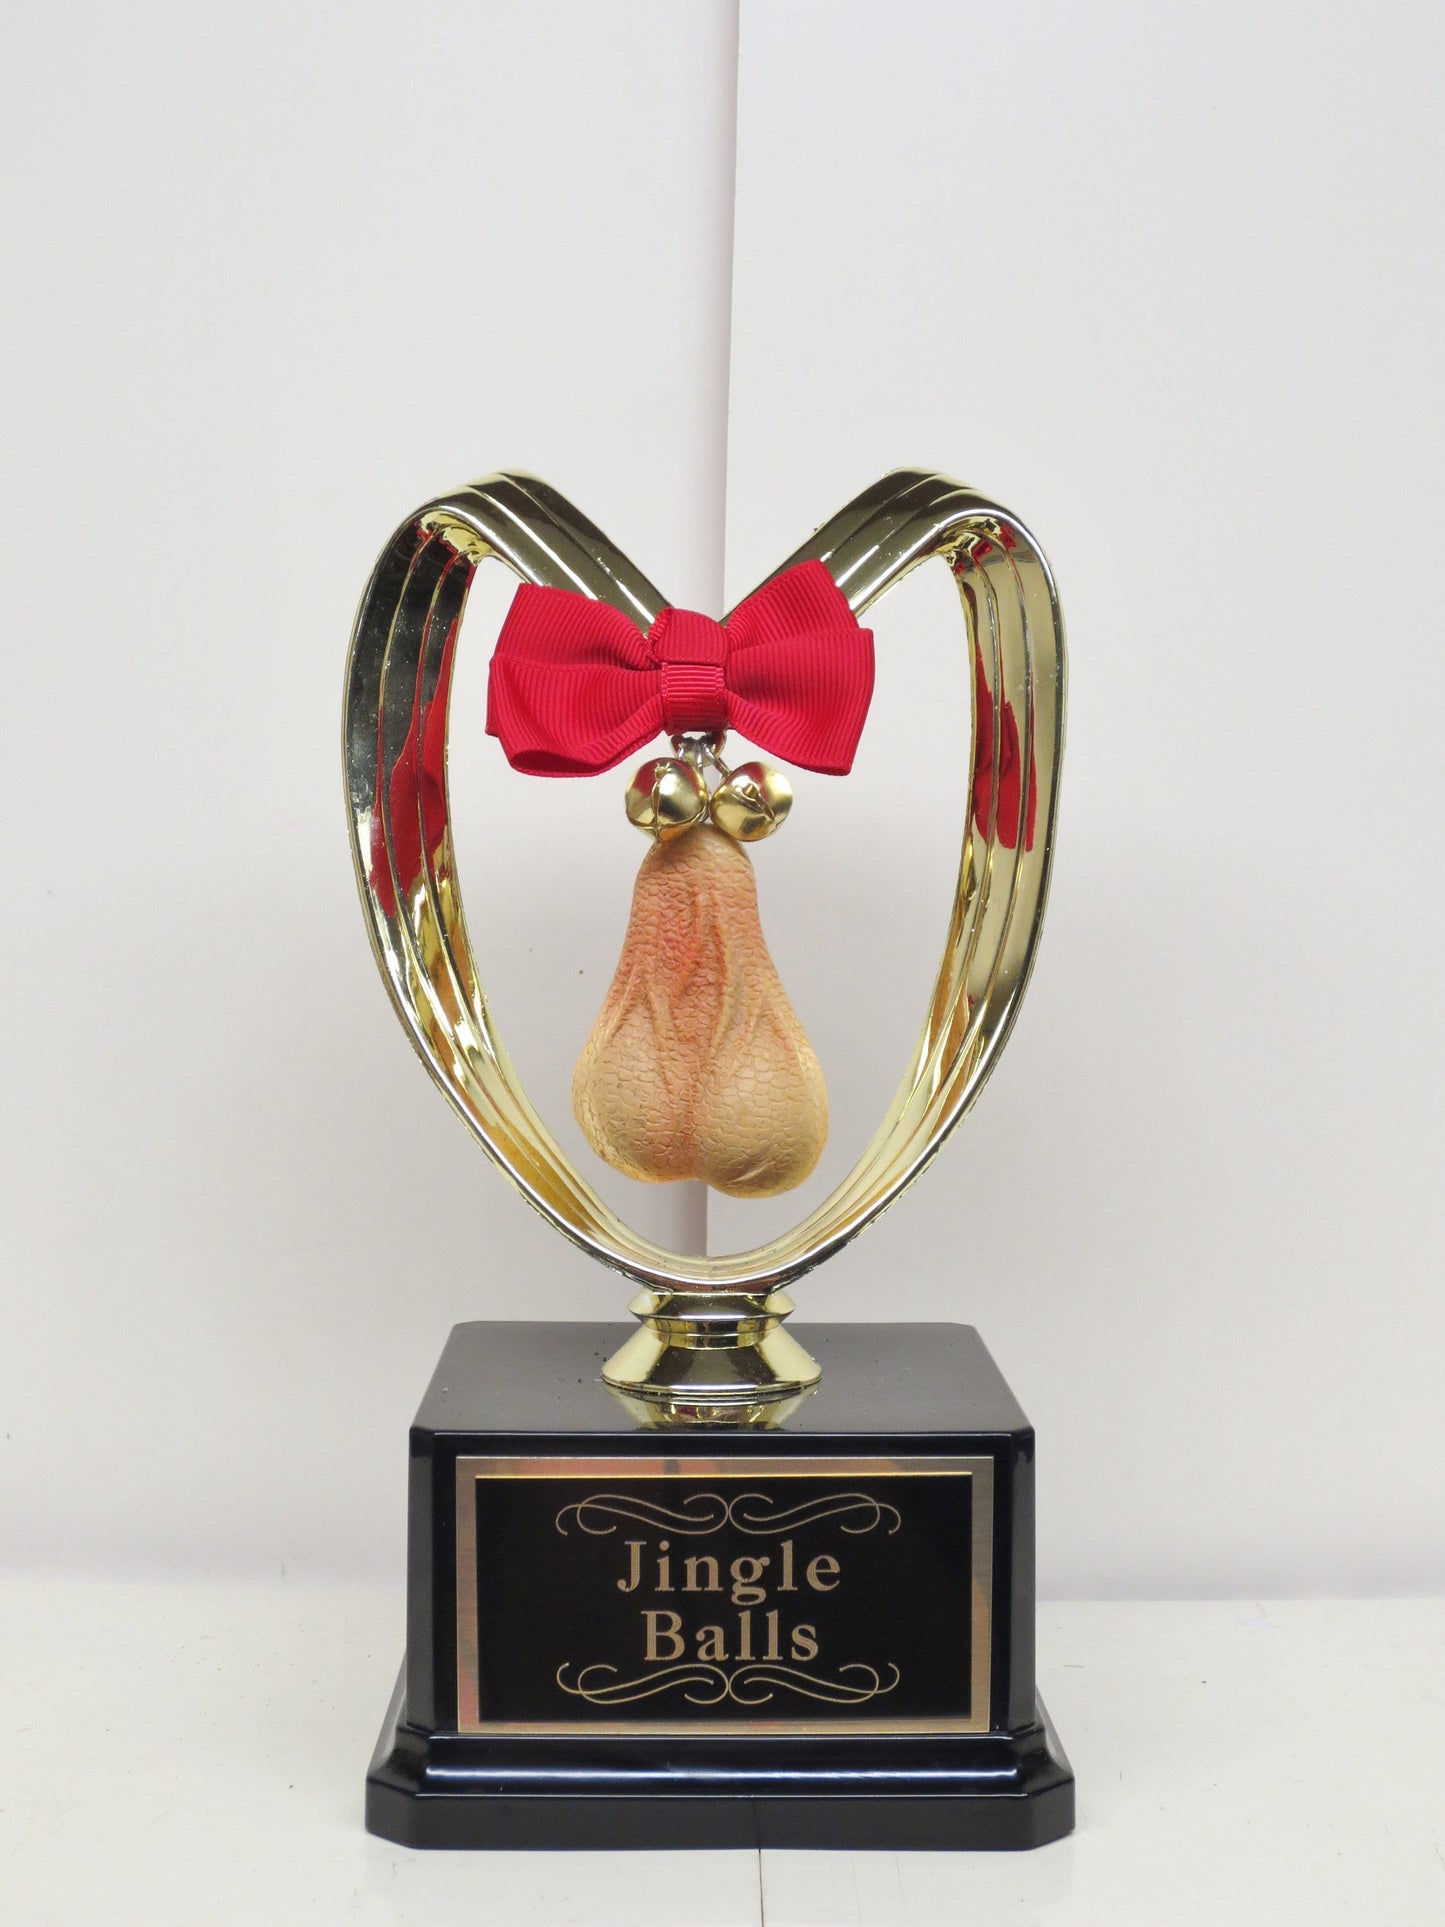 Jingle Balls Testicle Trophy Ugly Sweater Trophy Funny Christmas Ornament Holiday Aww Nuts! Adult Humor Gag Gift Penis Testicle Holiday